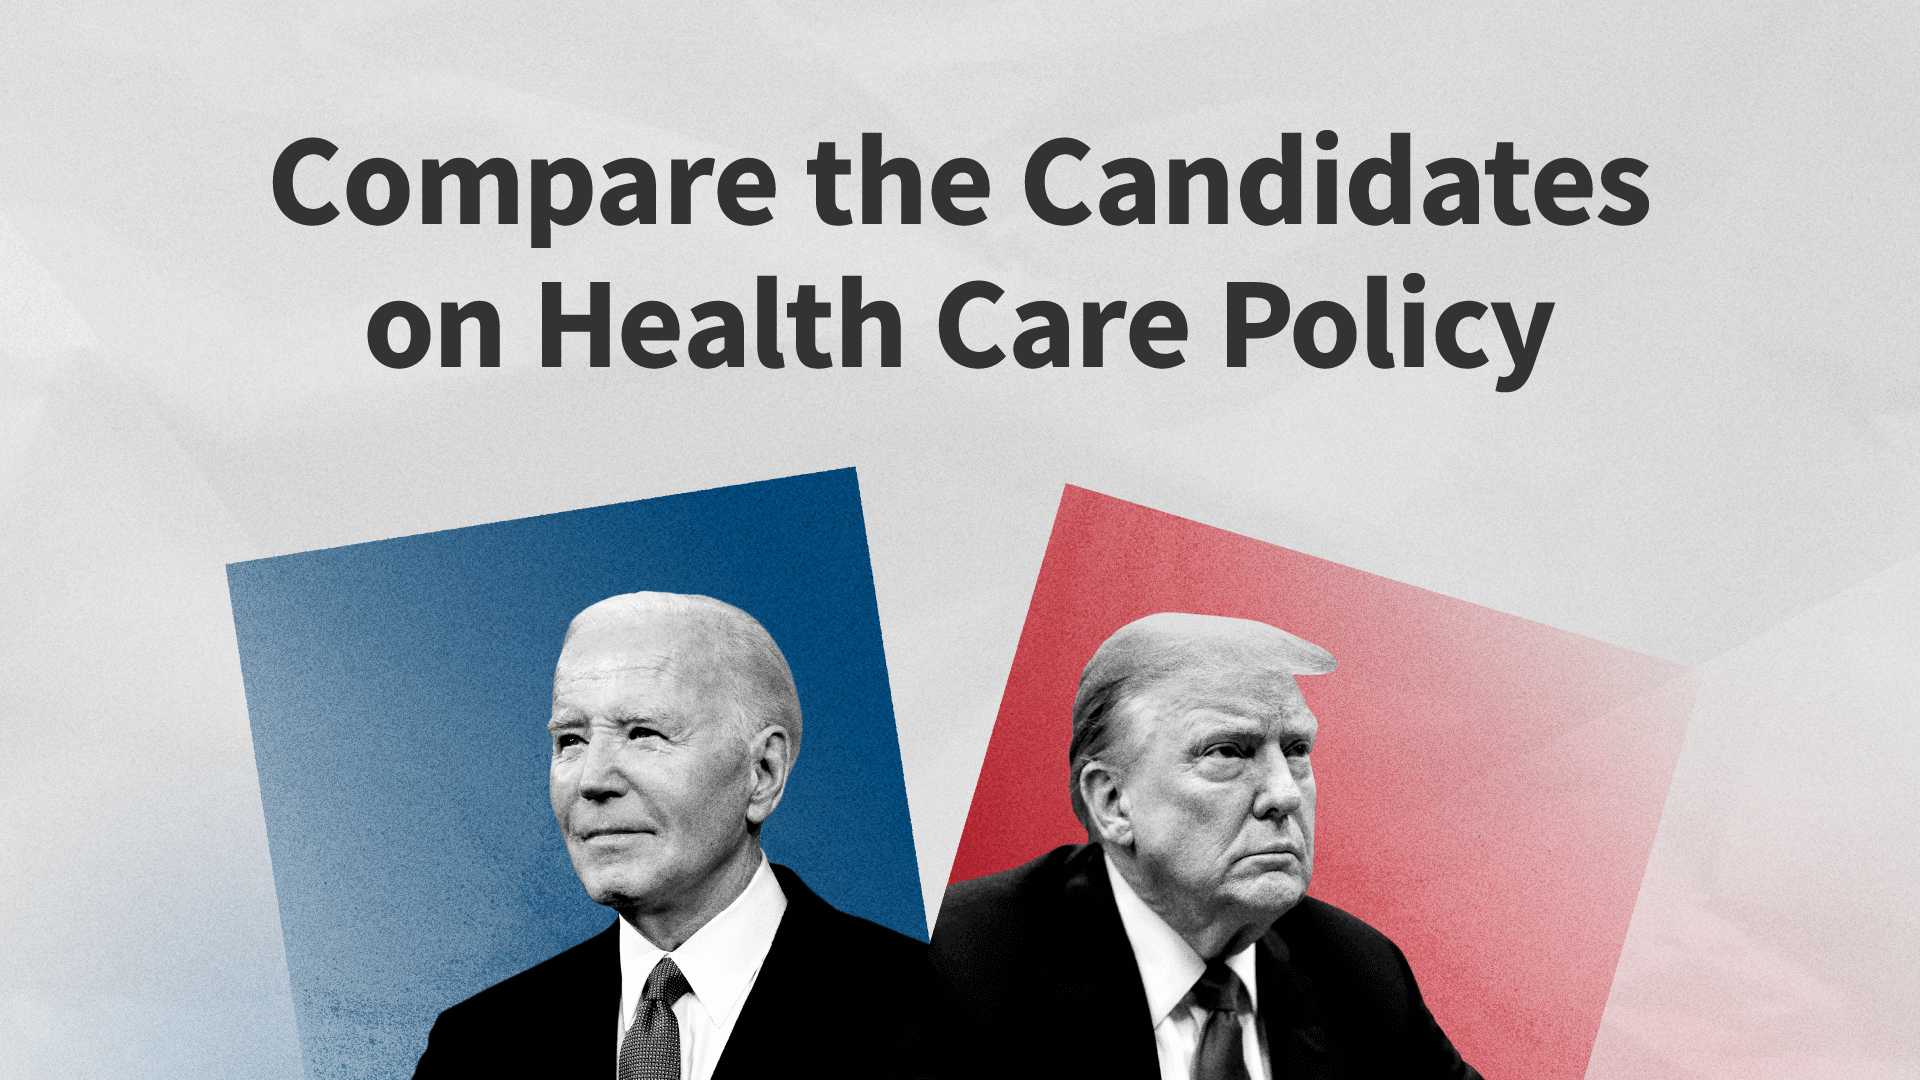 Analyzing the Differences in Health Care Policy among the Candidates